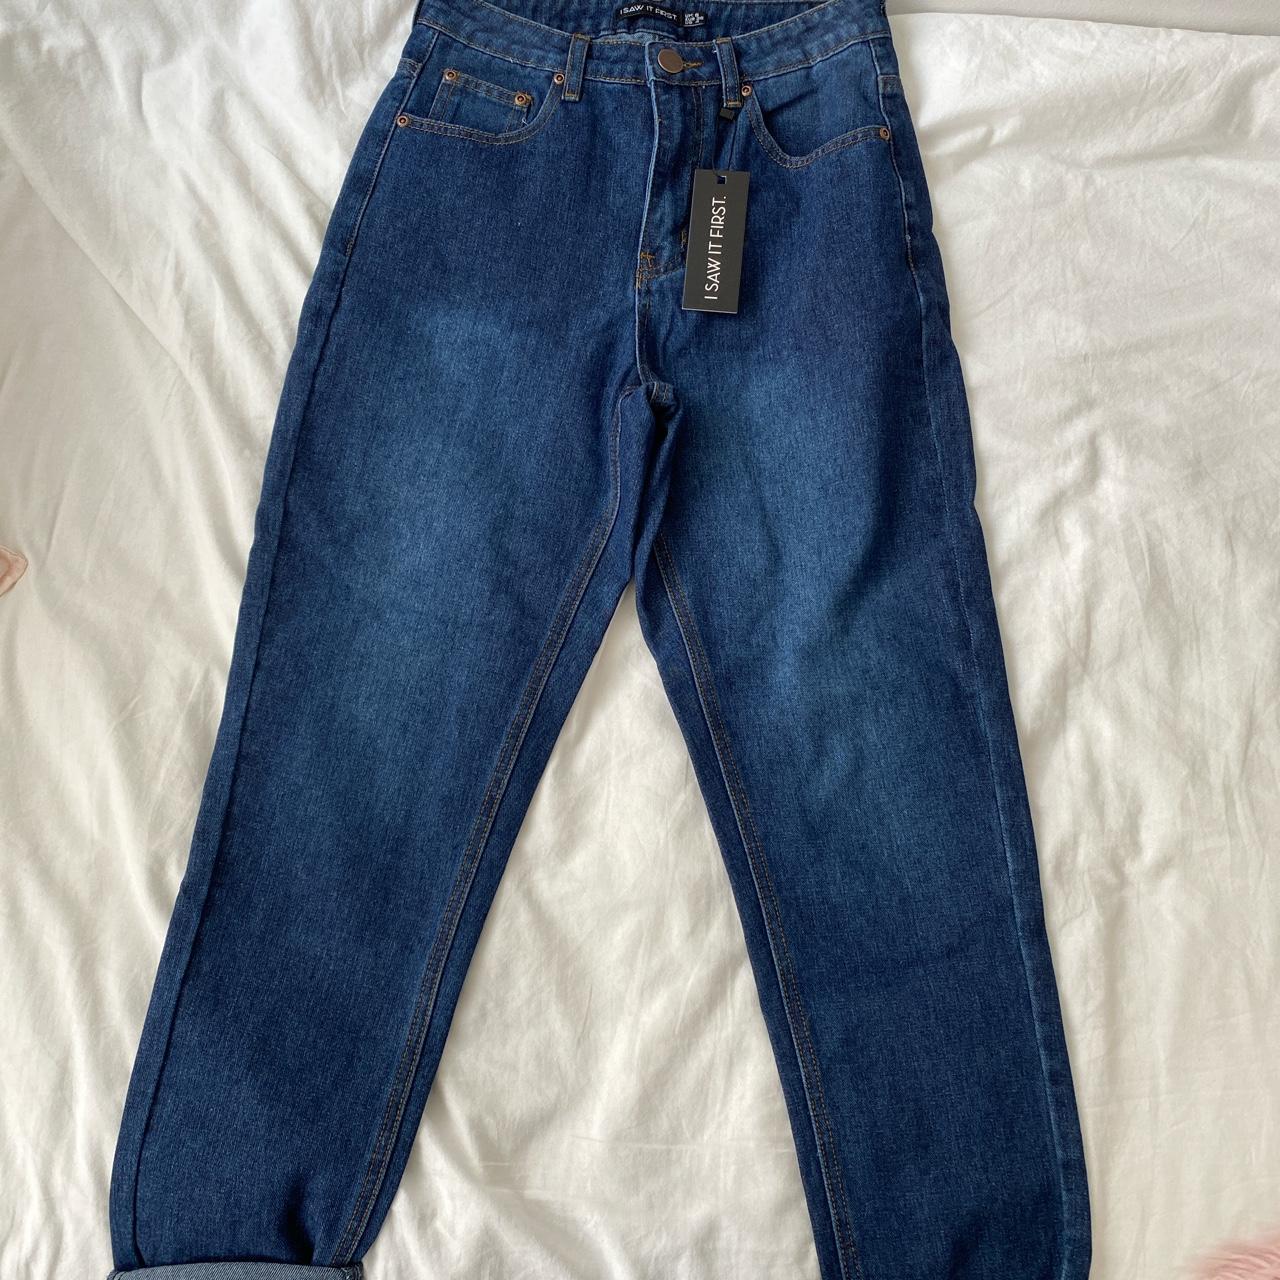 I Saw It First Women's Blue and Navy Jeans